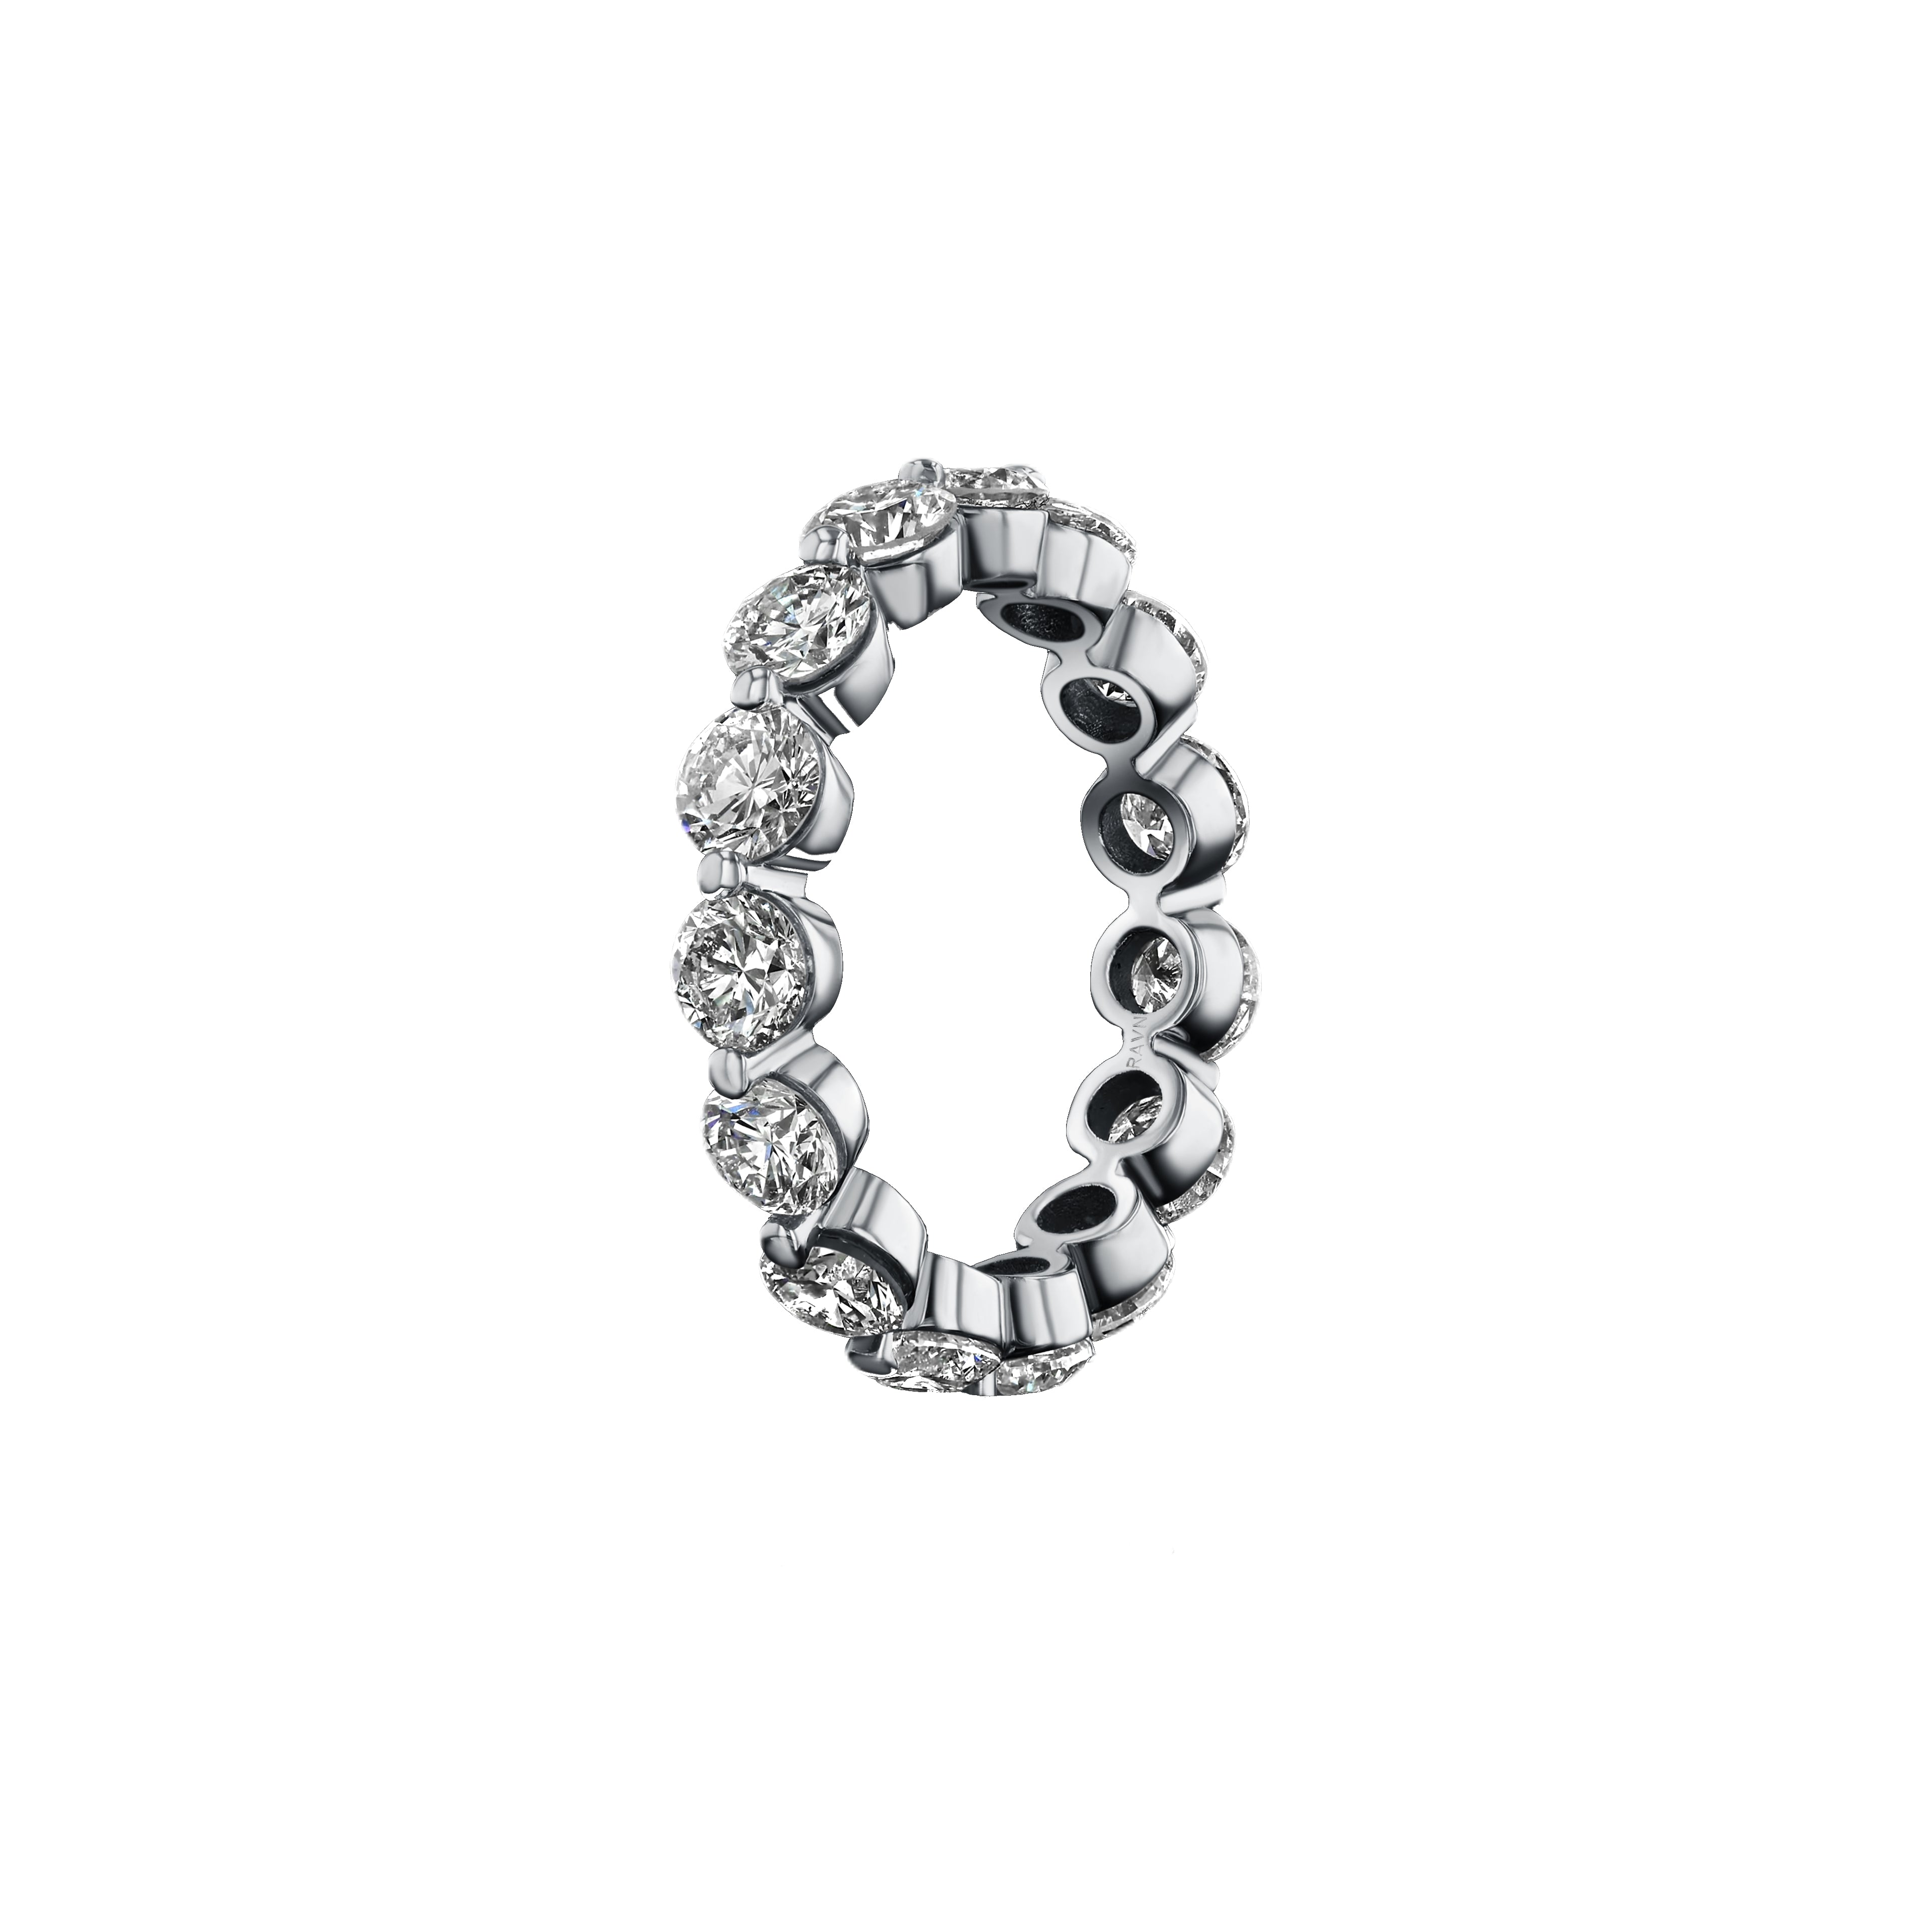 Eternity Band Ring, White Gold and Diamond Band Ring House of RAVN   